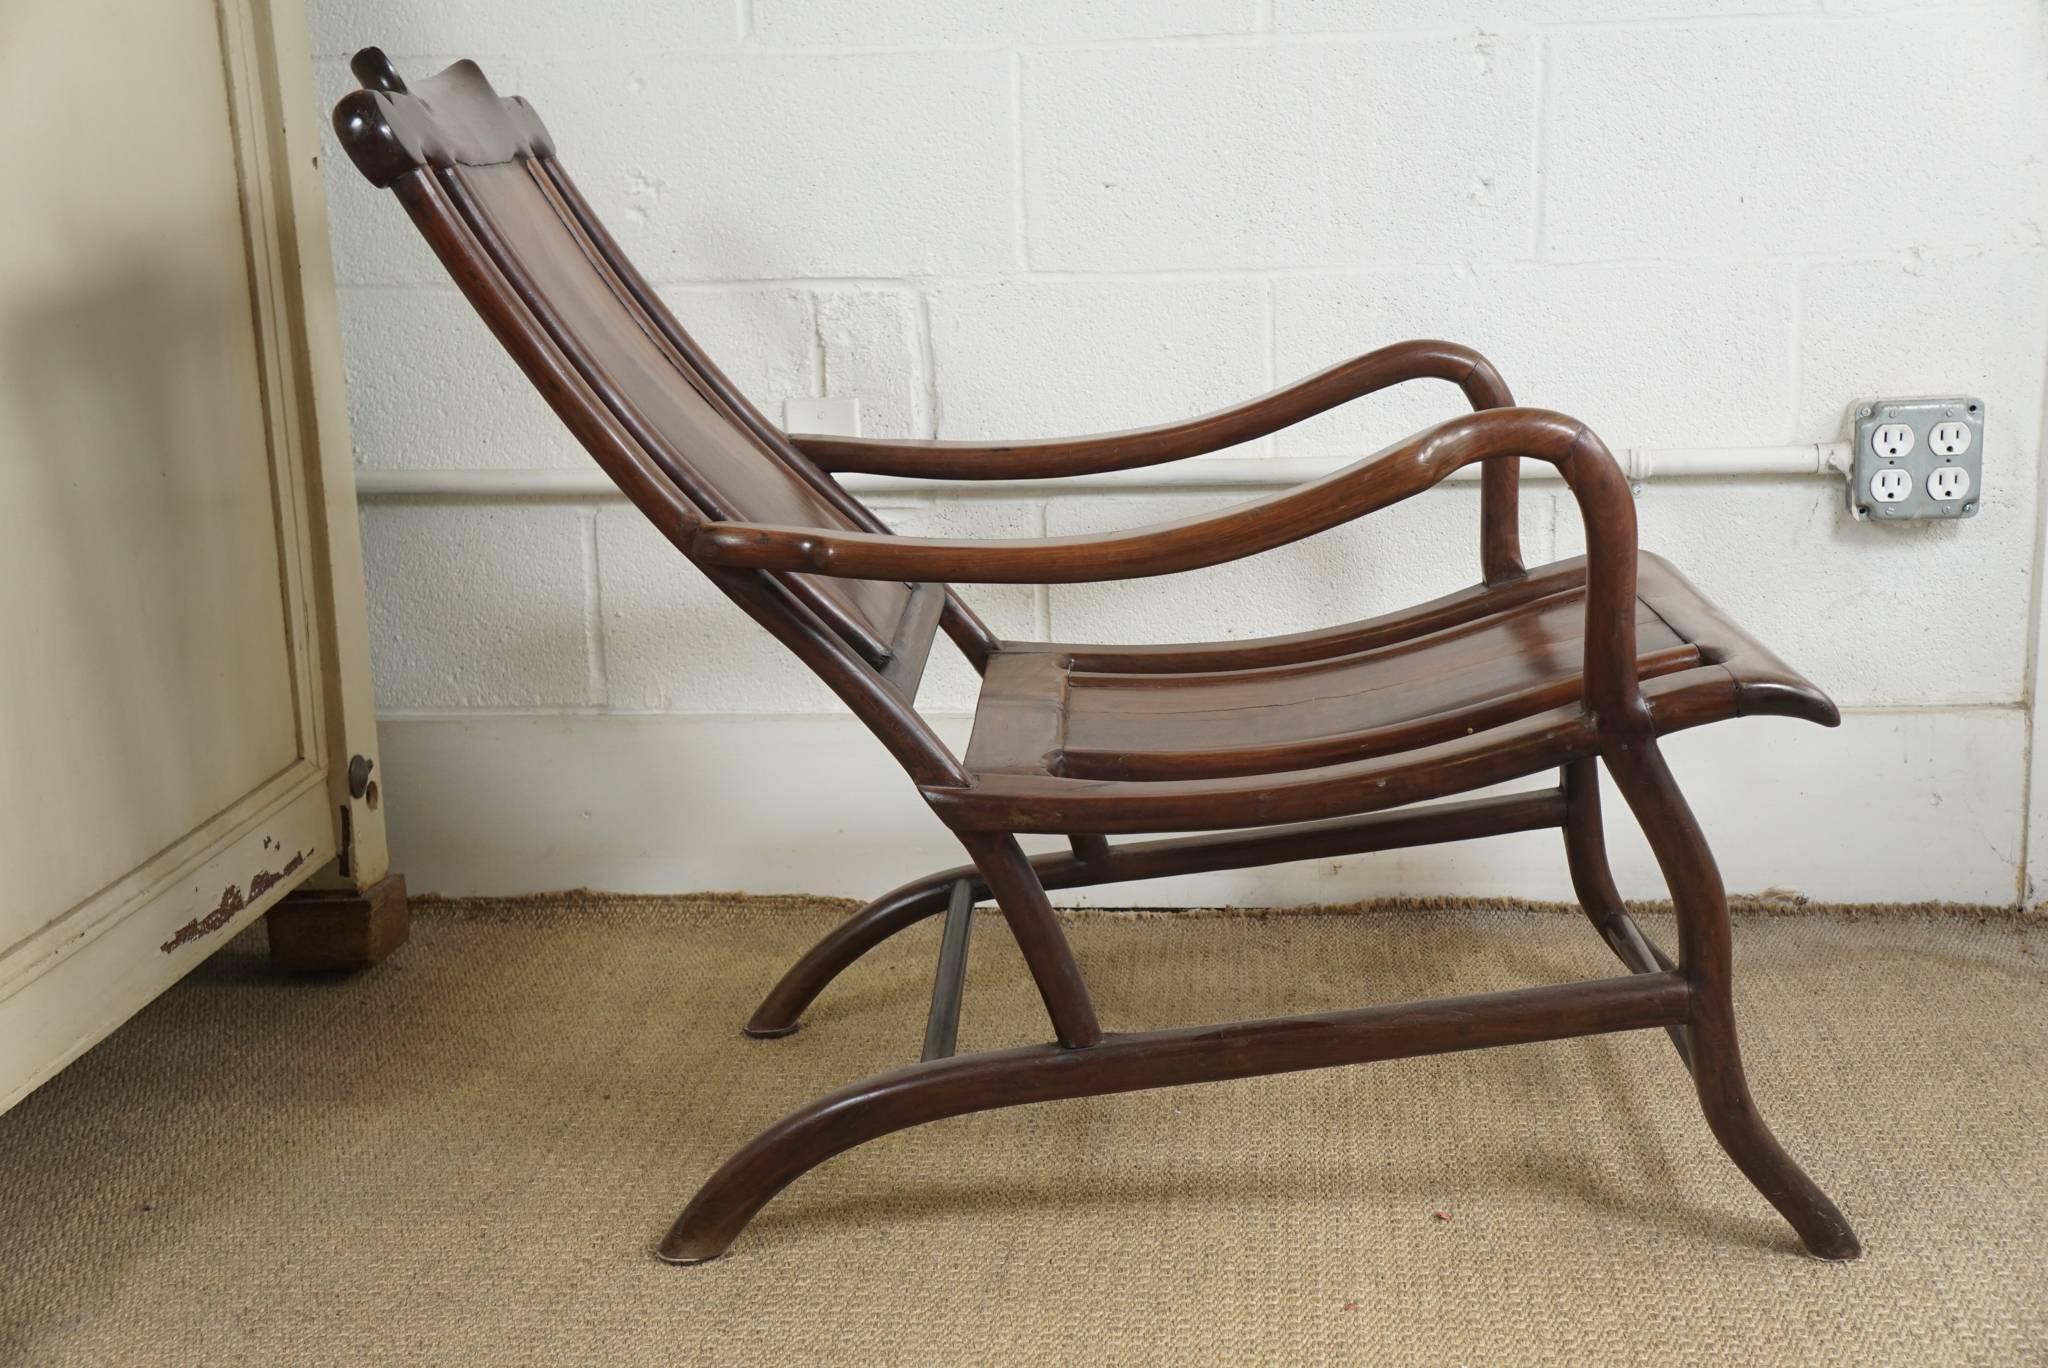 Chinese Plantation Chair in Walnut In Excellent Condition For Sale In Hudson, NY